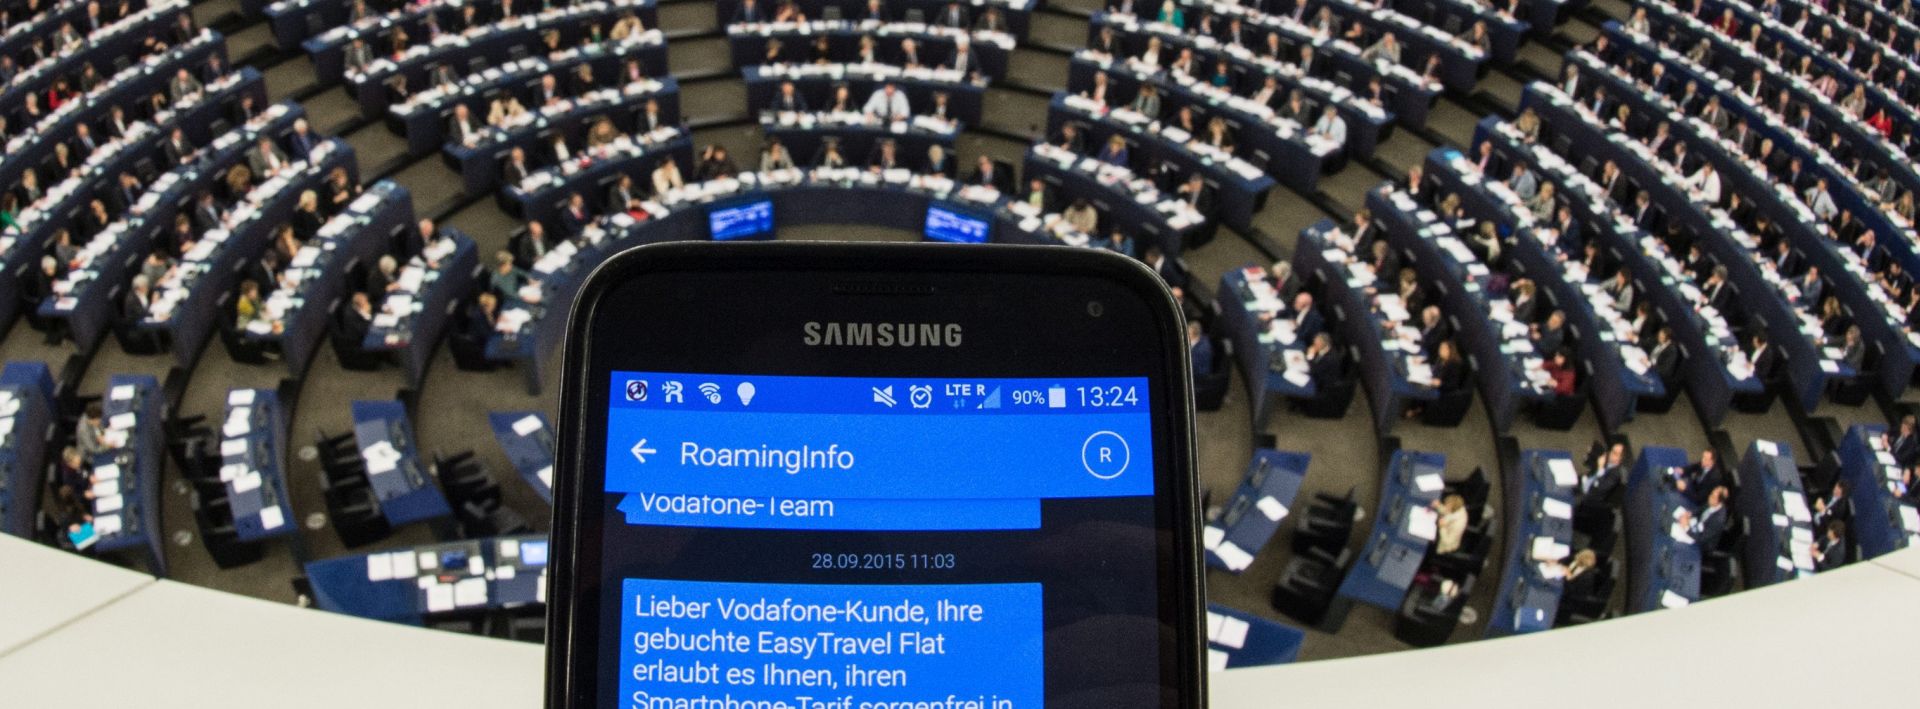 epa04998455 A hand holds a mobile phone showing SMS roaming information in the European Parliament in Strasbourg, France, 27 October 2015. Members of the European Parliament were voting on whether to scrap data roaming charges within the EU for mobile phone users.  EPA/PATRICK SEEGER